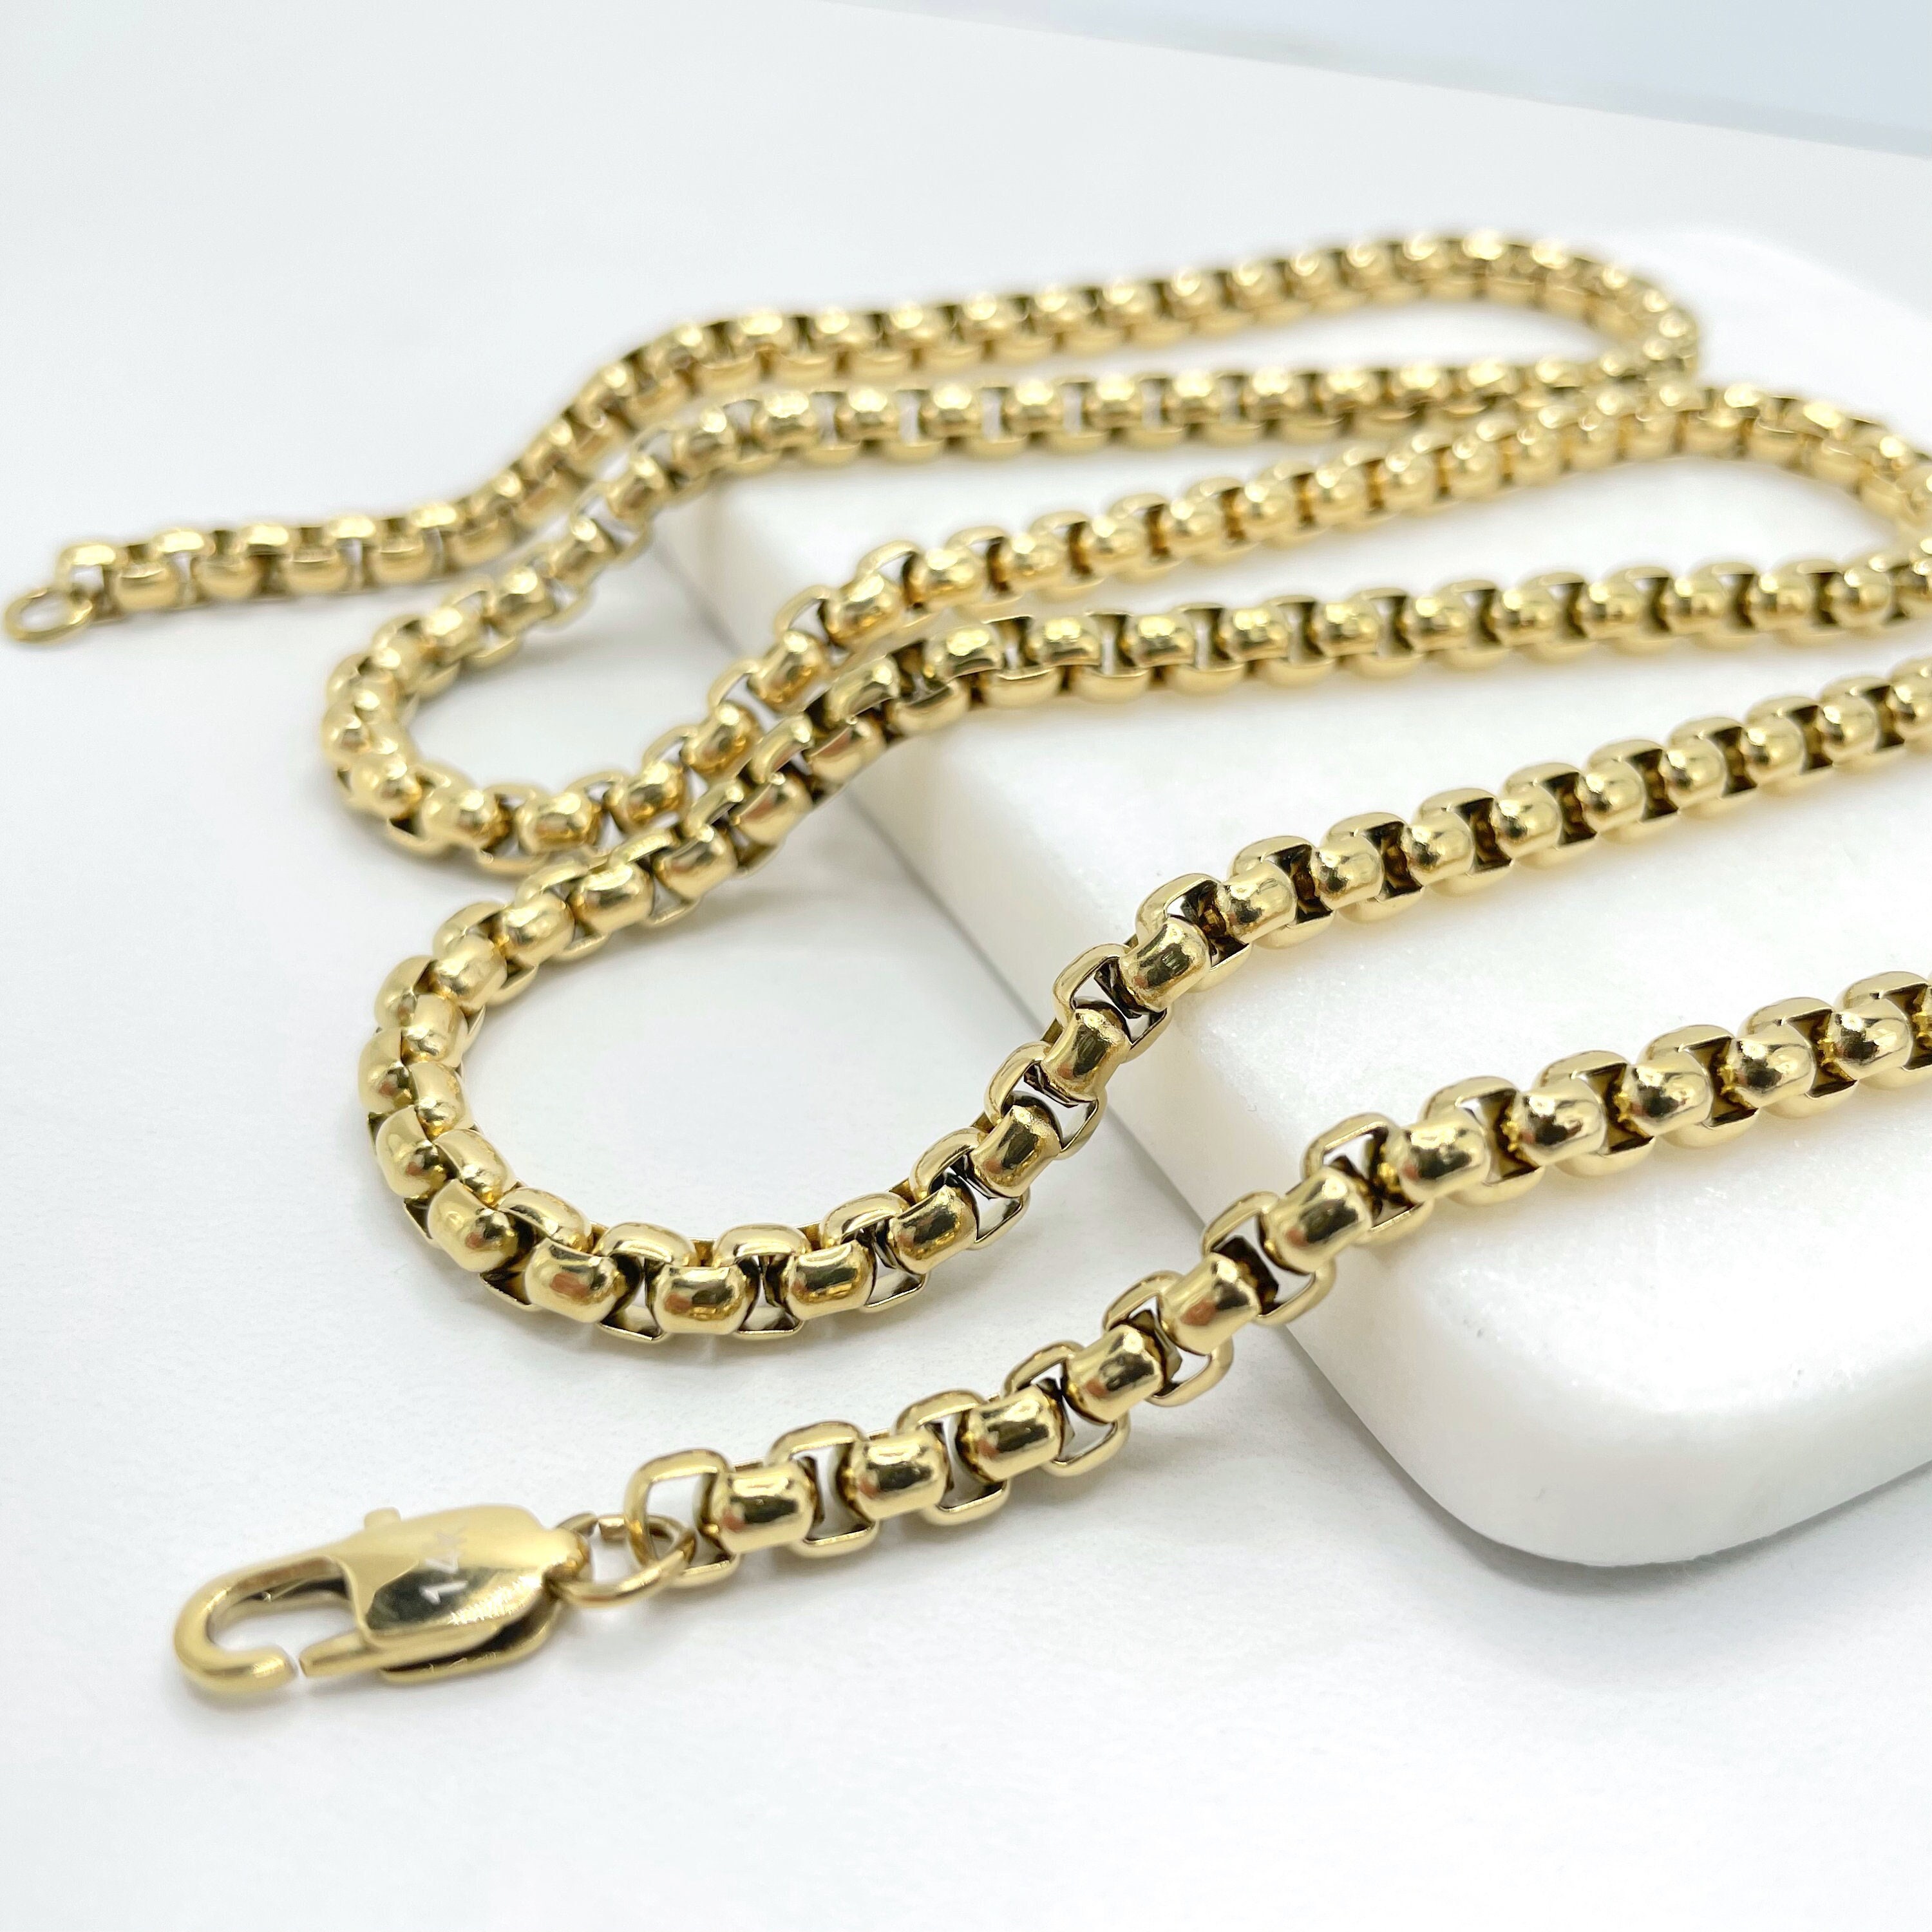 5pcs 45+5cm plated Gold Stainless Steel Link Chains Oval Bulk Necklaces  Jewelry Adjustable Chains